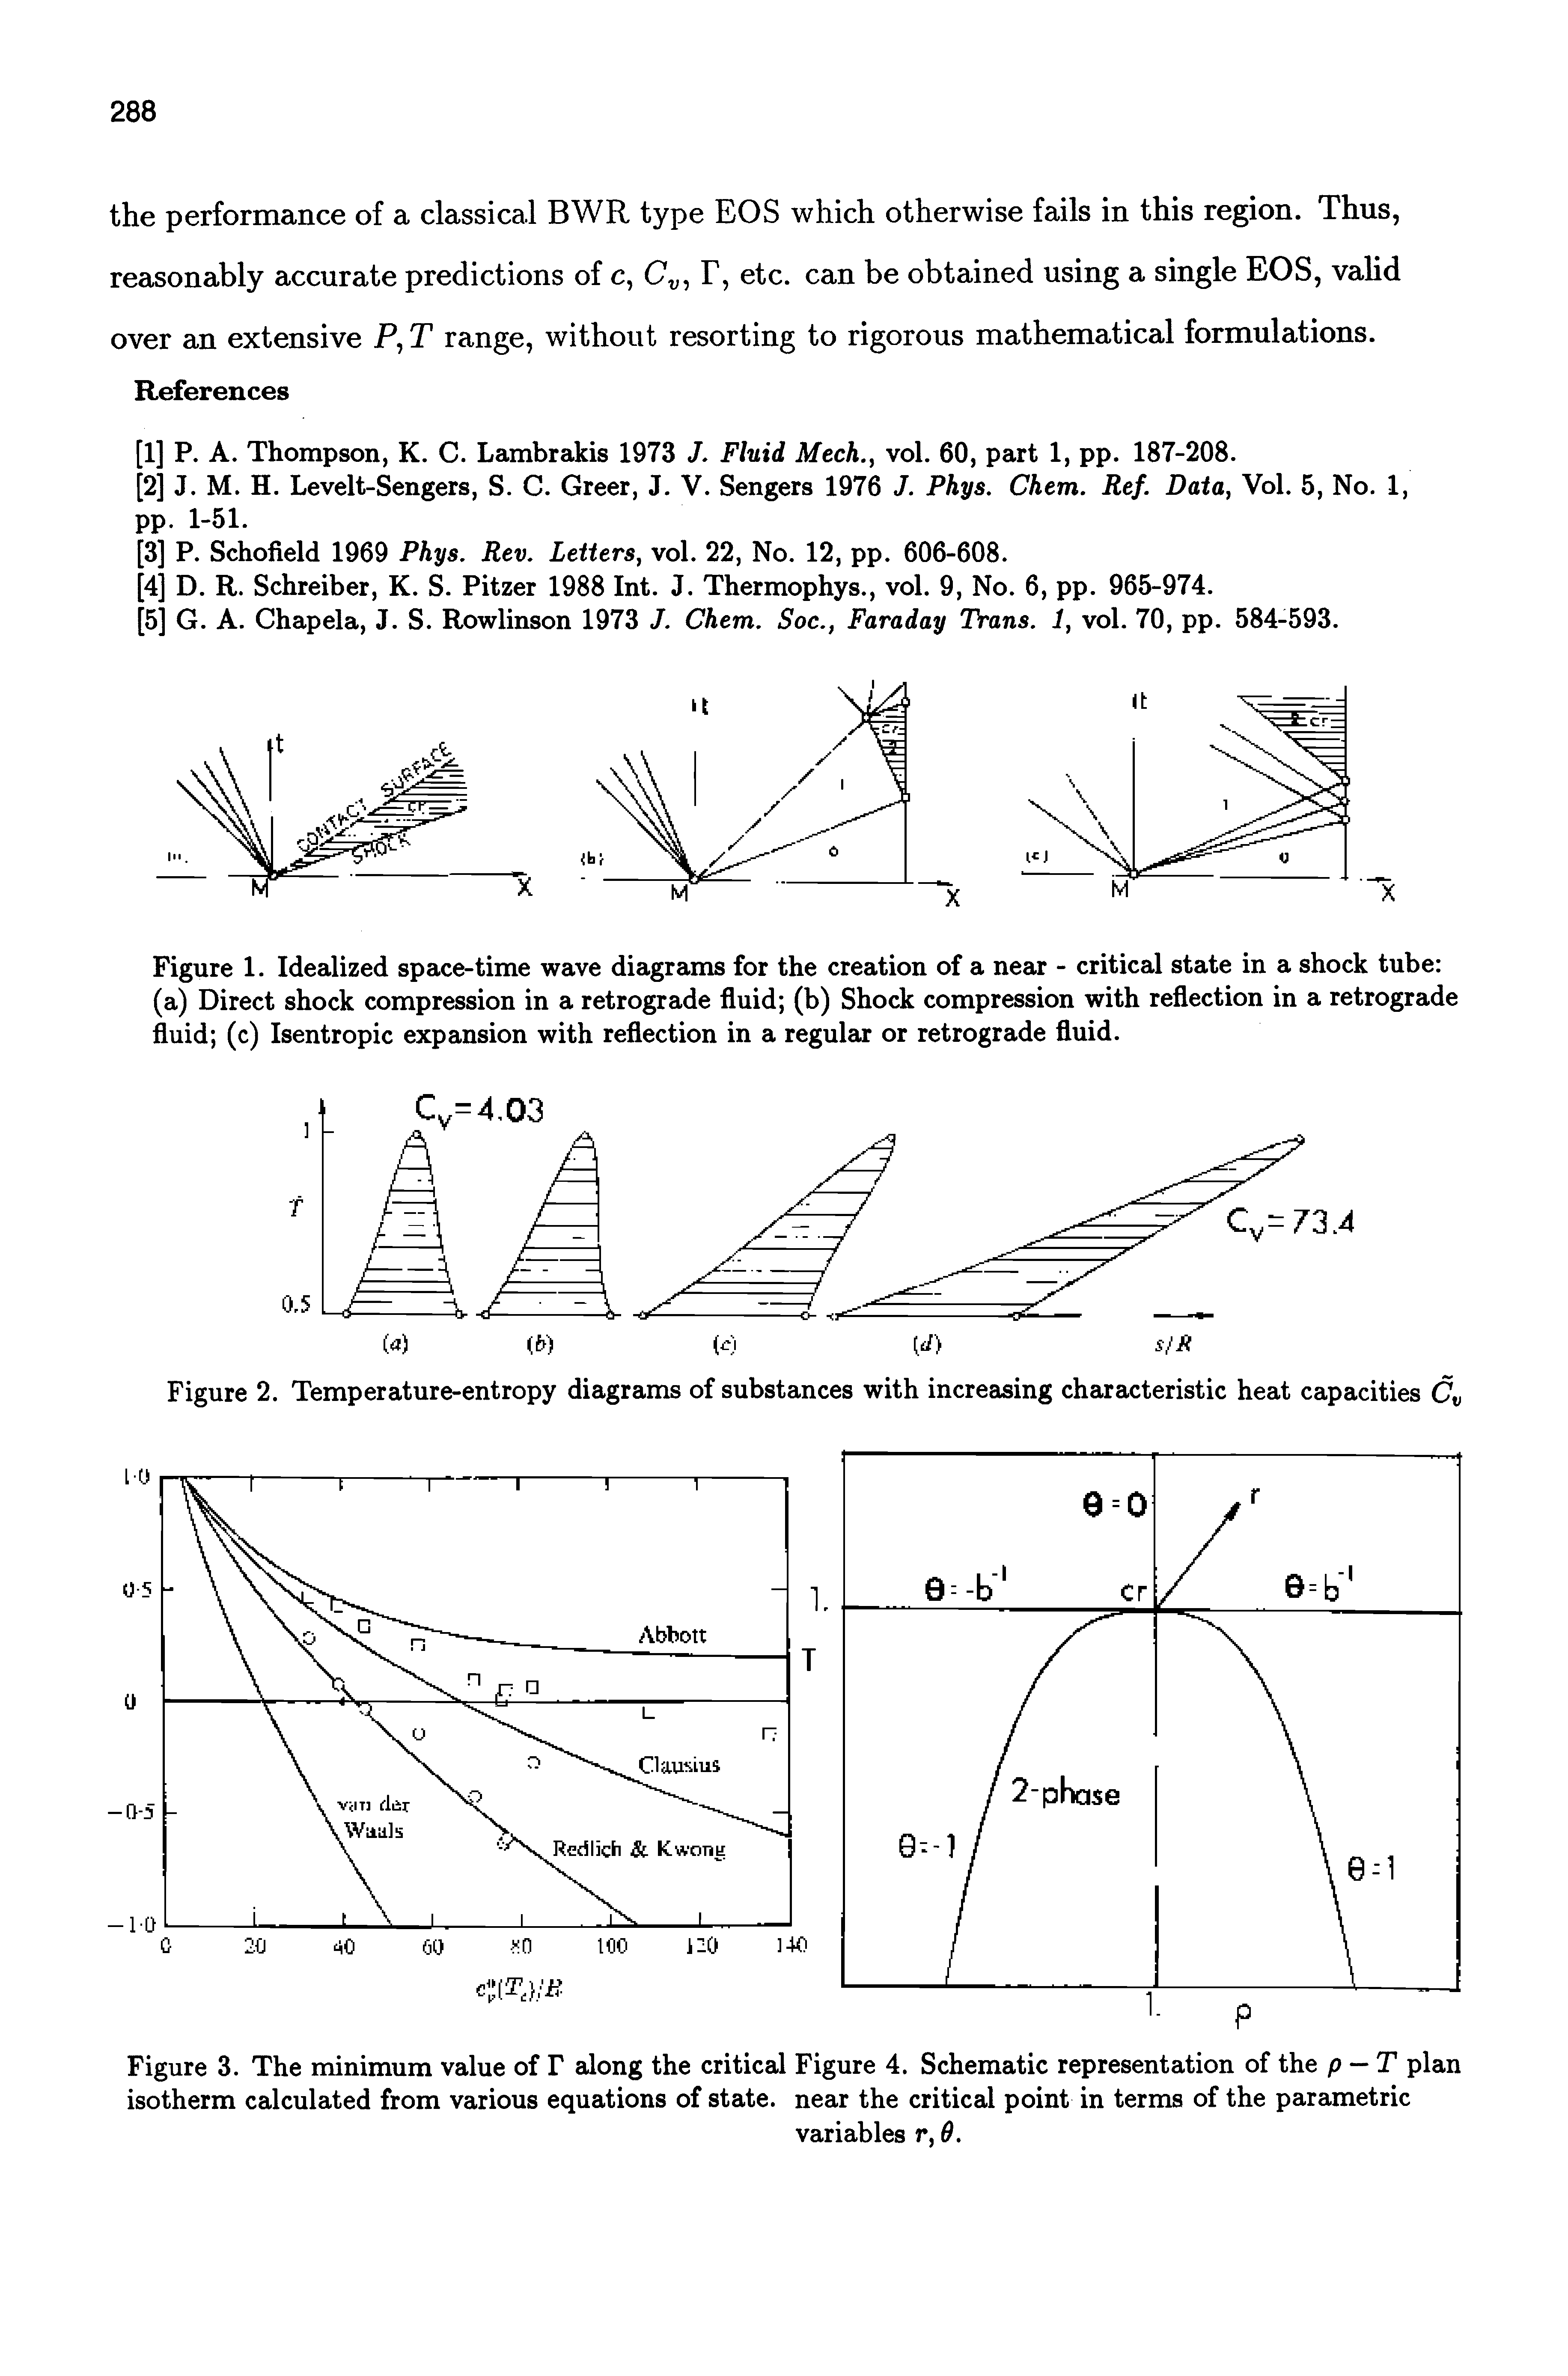 Figure 3. The minimum value of F along the critical Figure 4. Schematic representation of the p — T plan isotherm calculated from various equations of state, near the critical point in terms of the parametric...